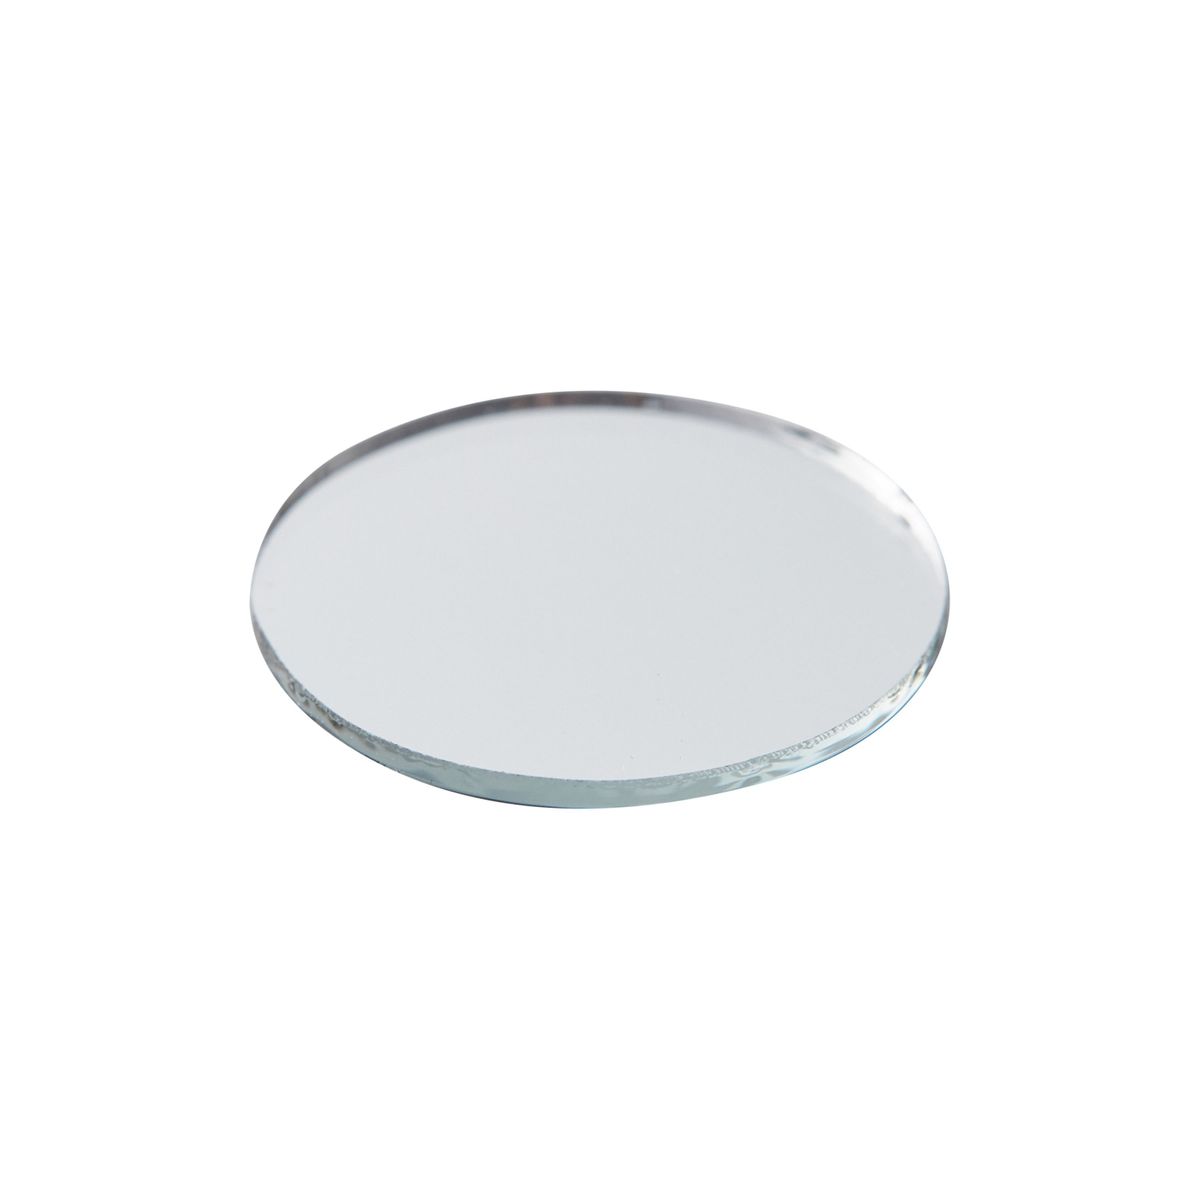 120 Pack Small Round Mirrors for Crafts, 1 Inch Glass Tile Circles